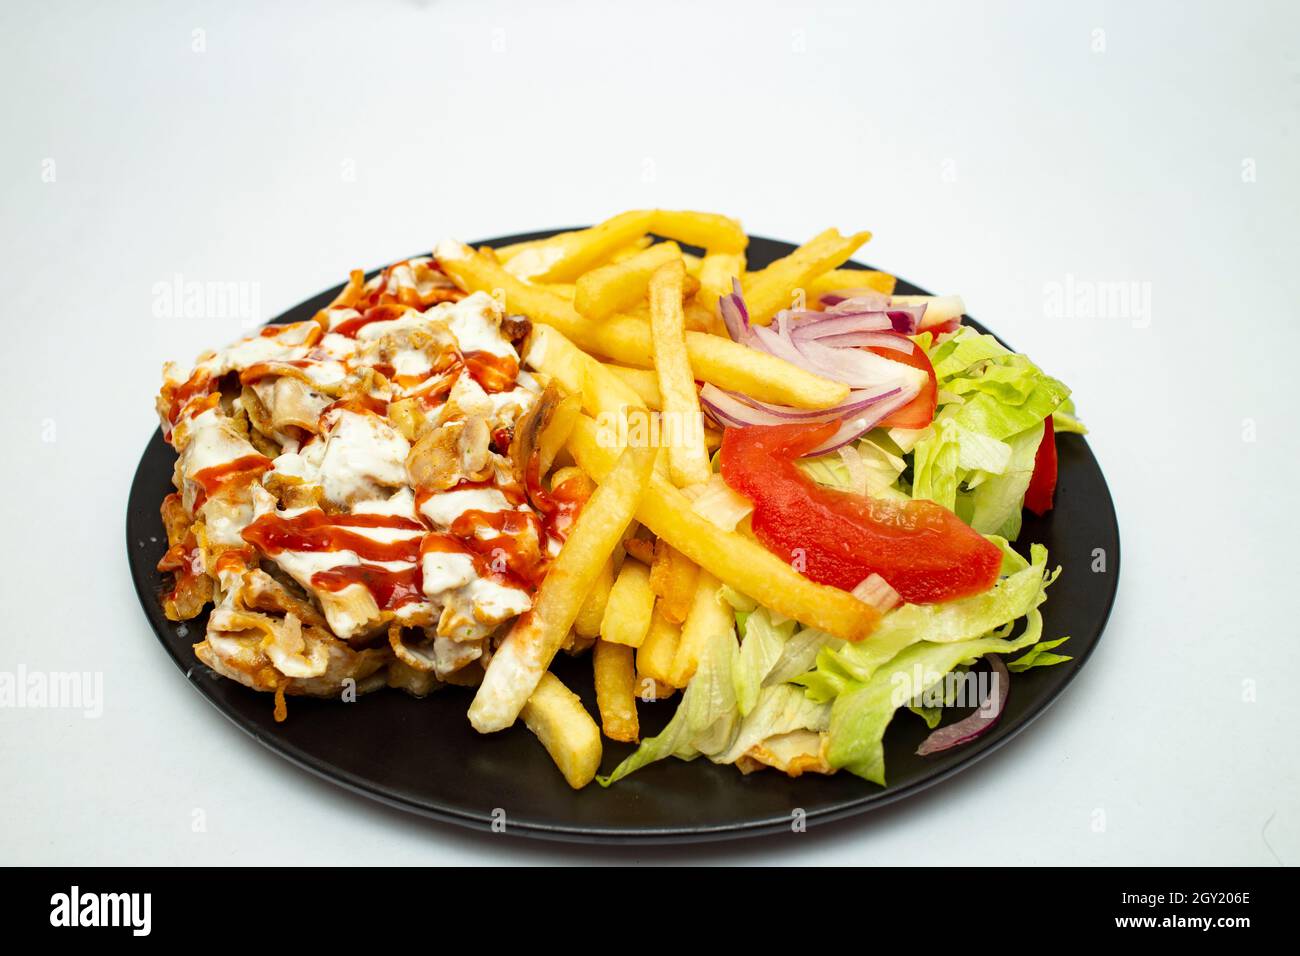 Gyros Plate High Resolution Stock Photography and Images - Alamy